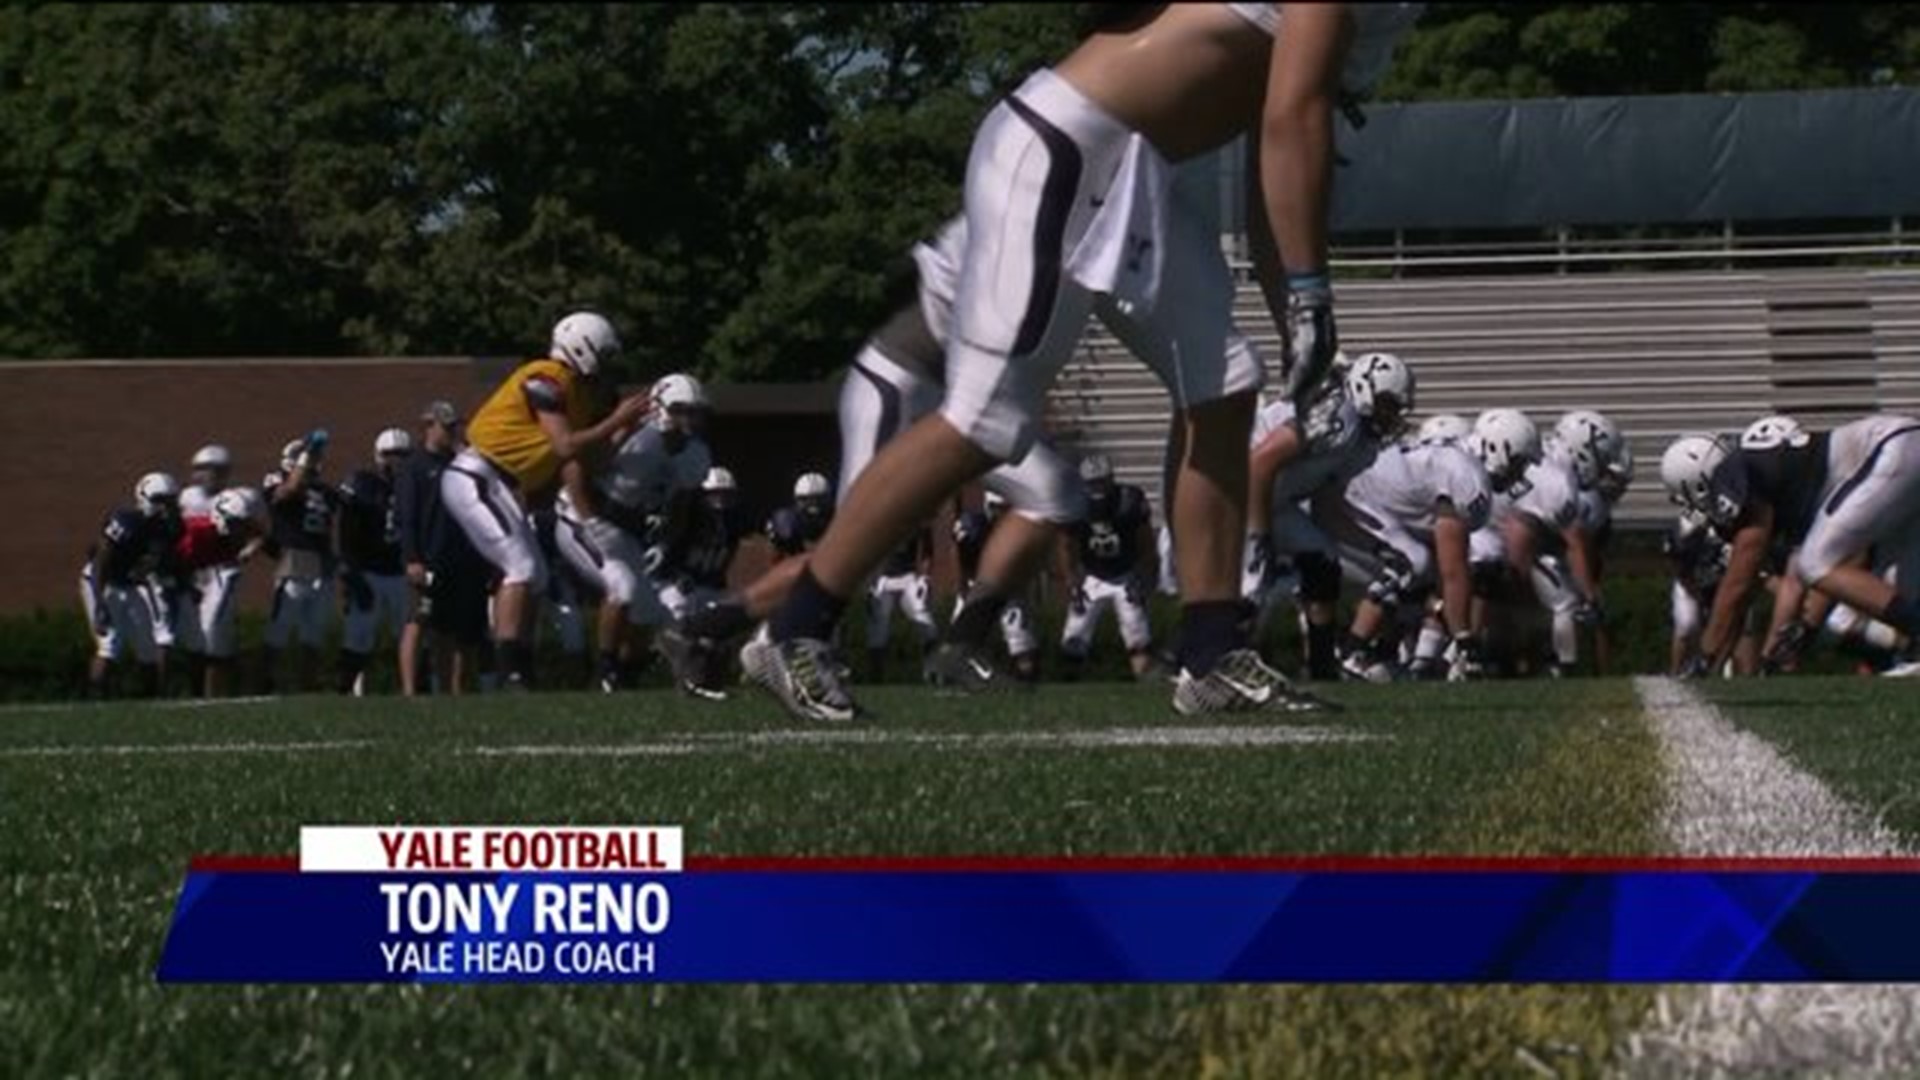 Yale coach hopes to have a good record this season